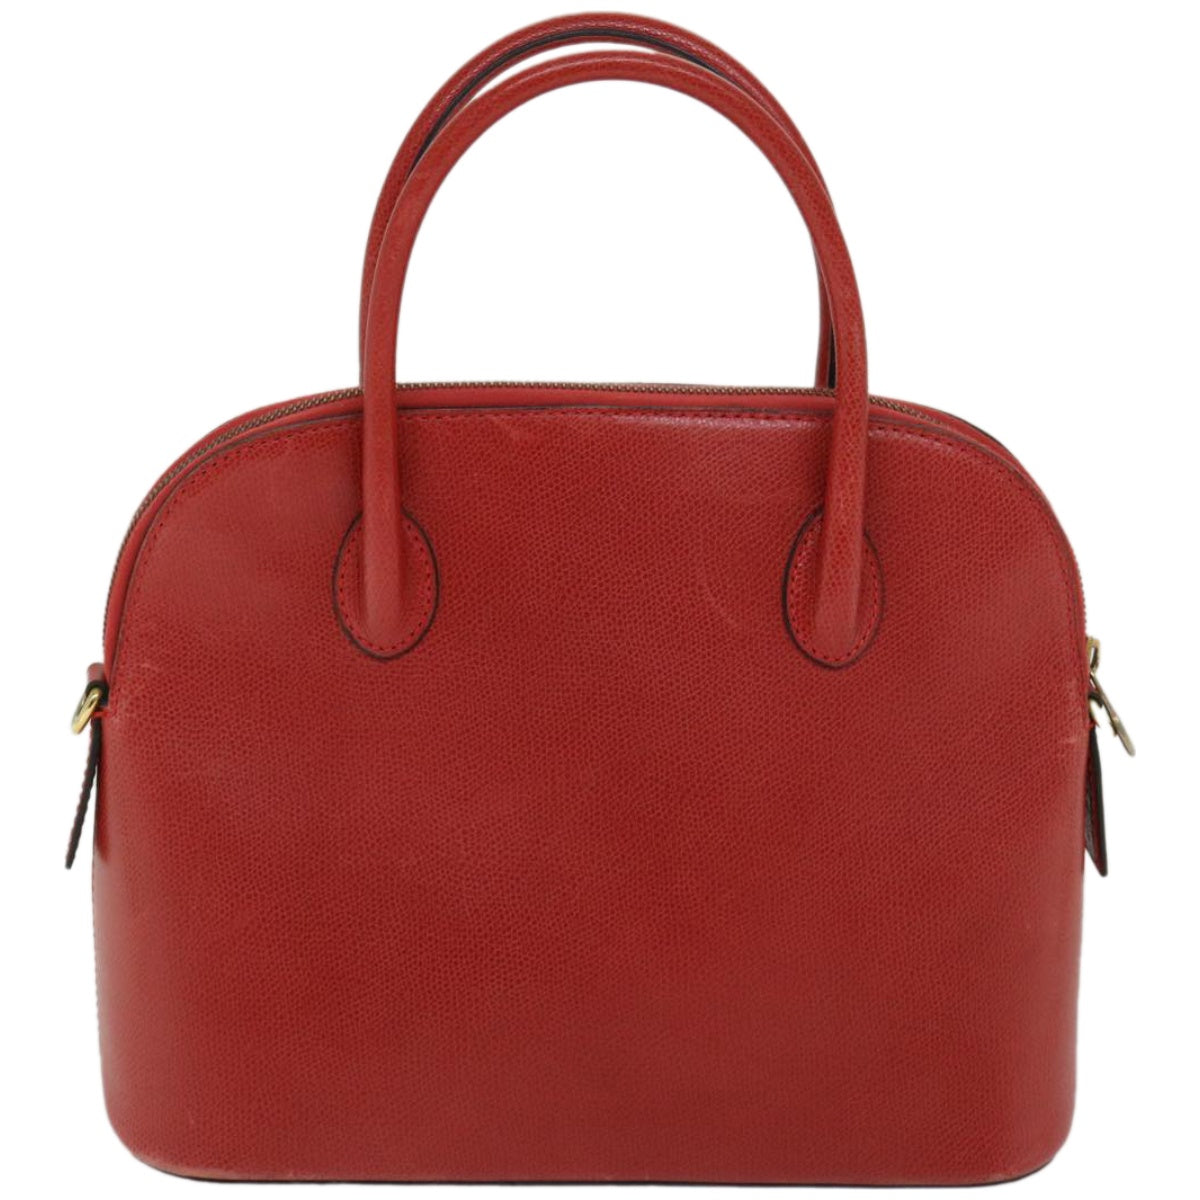 CELINE Hand Bag Leather 2way Red Auth 67191